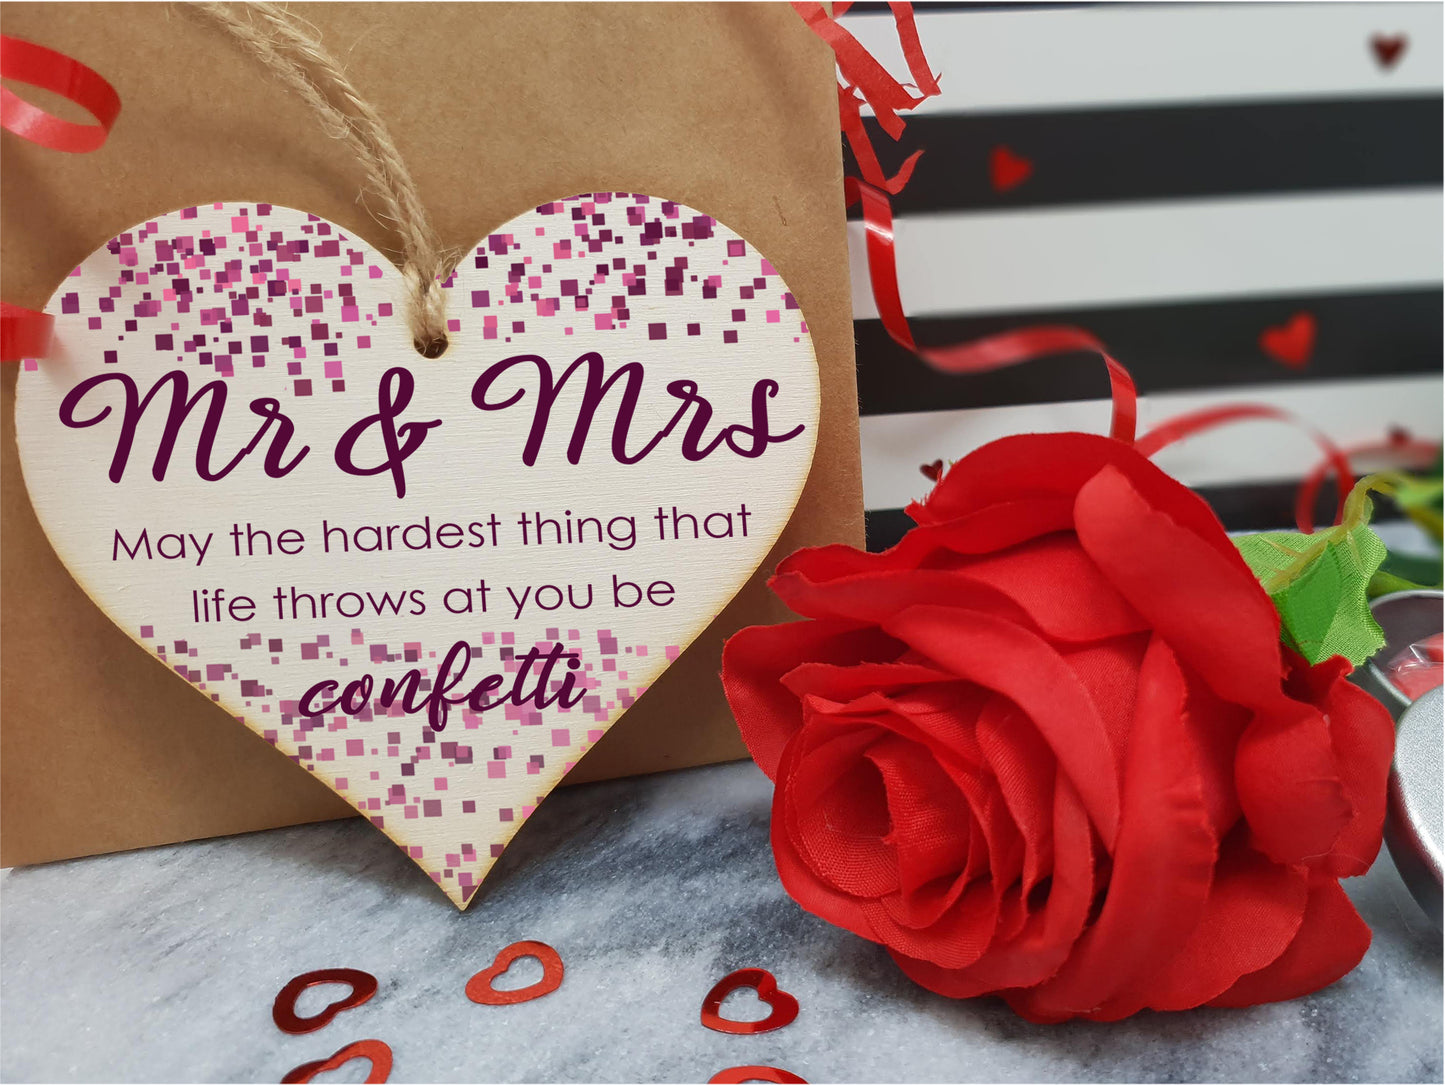 Handmade Wooden Hanging Heart Plaque Gift for the Perfect Newly Wed Couple